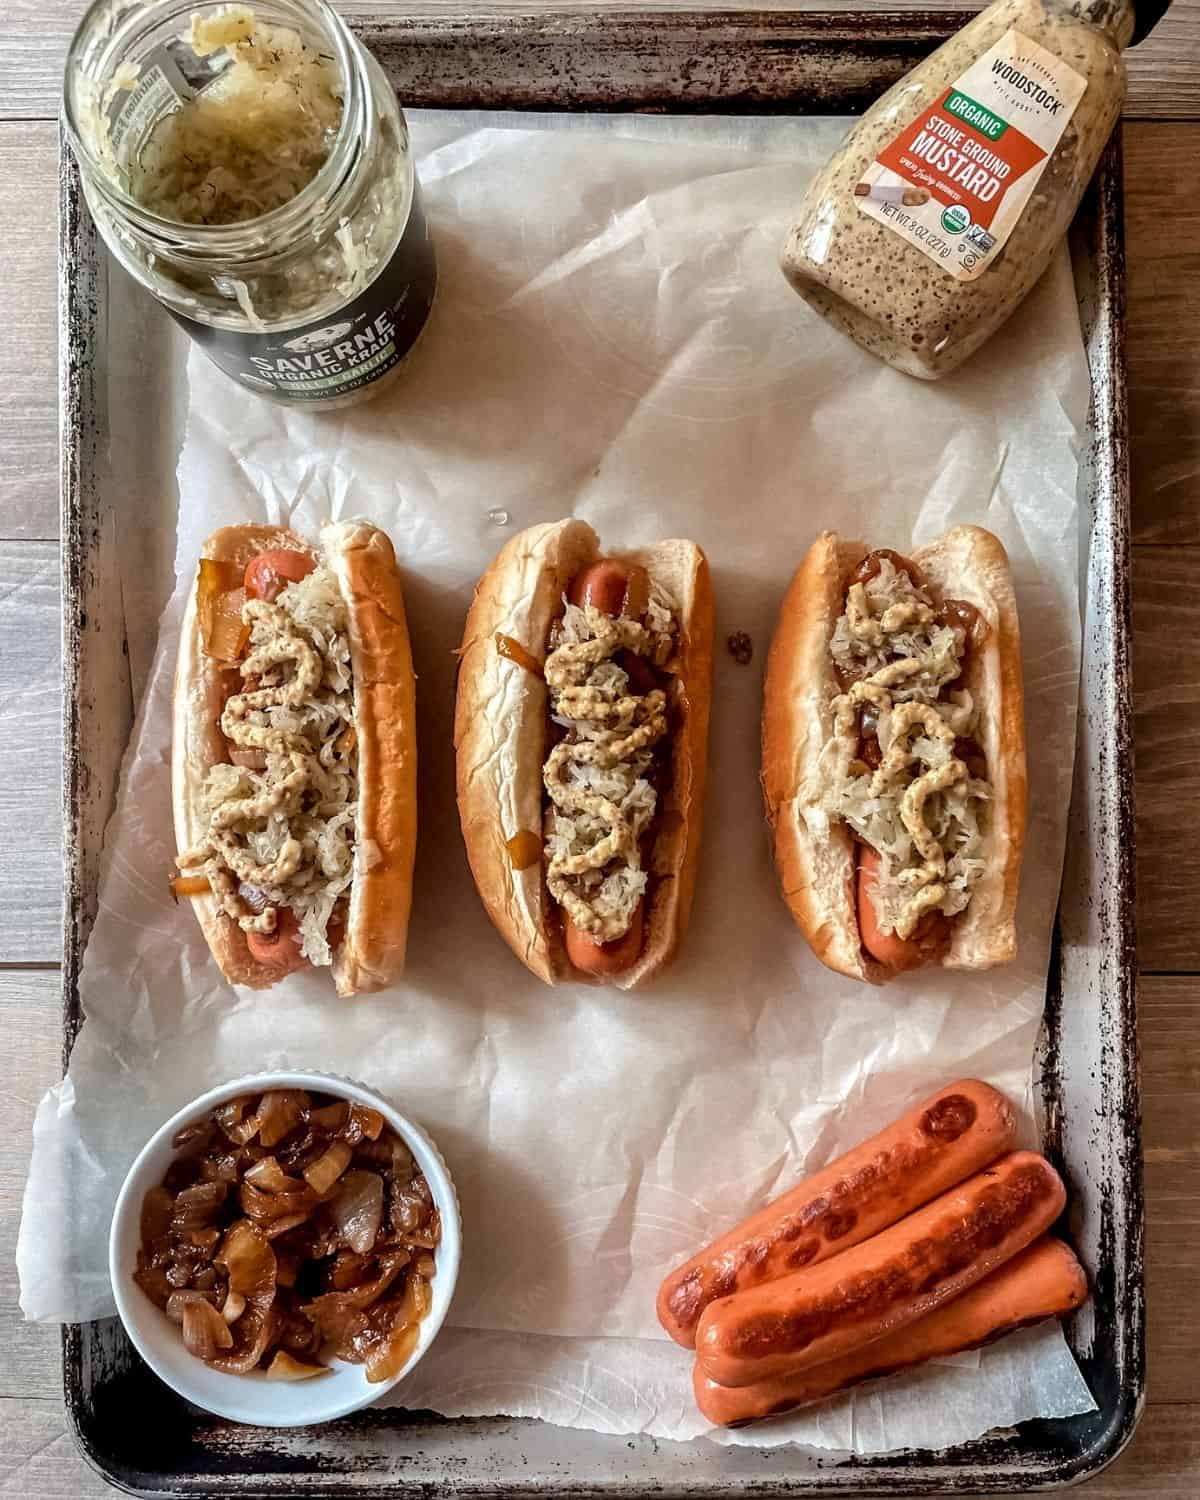 Three hot dogs topped with onions, sauerkraut and mustard in buns, on a sheet pan, mustard in top right corner, sauerkraut in top left corner, caramelized onions in bottom left corner, cooked hotdogs in bottom right corner.